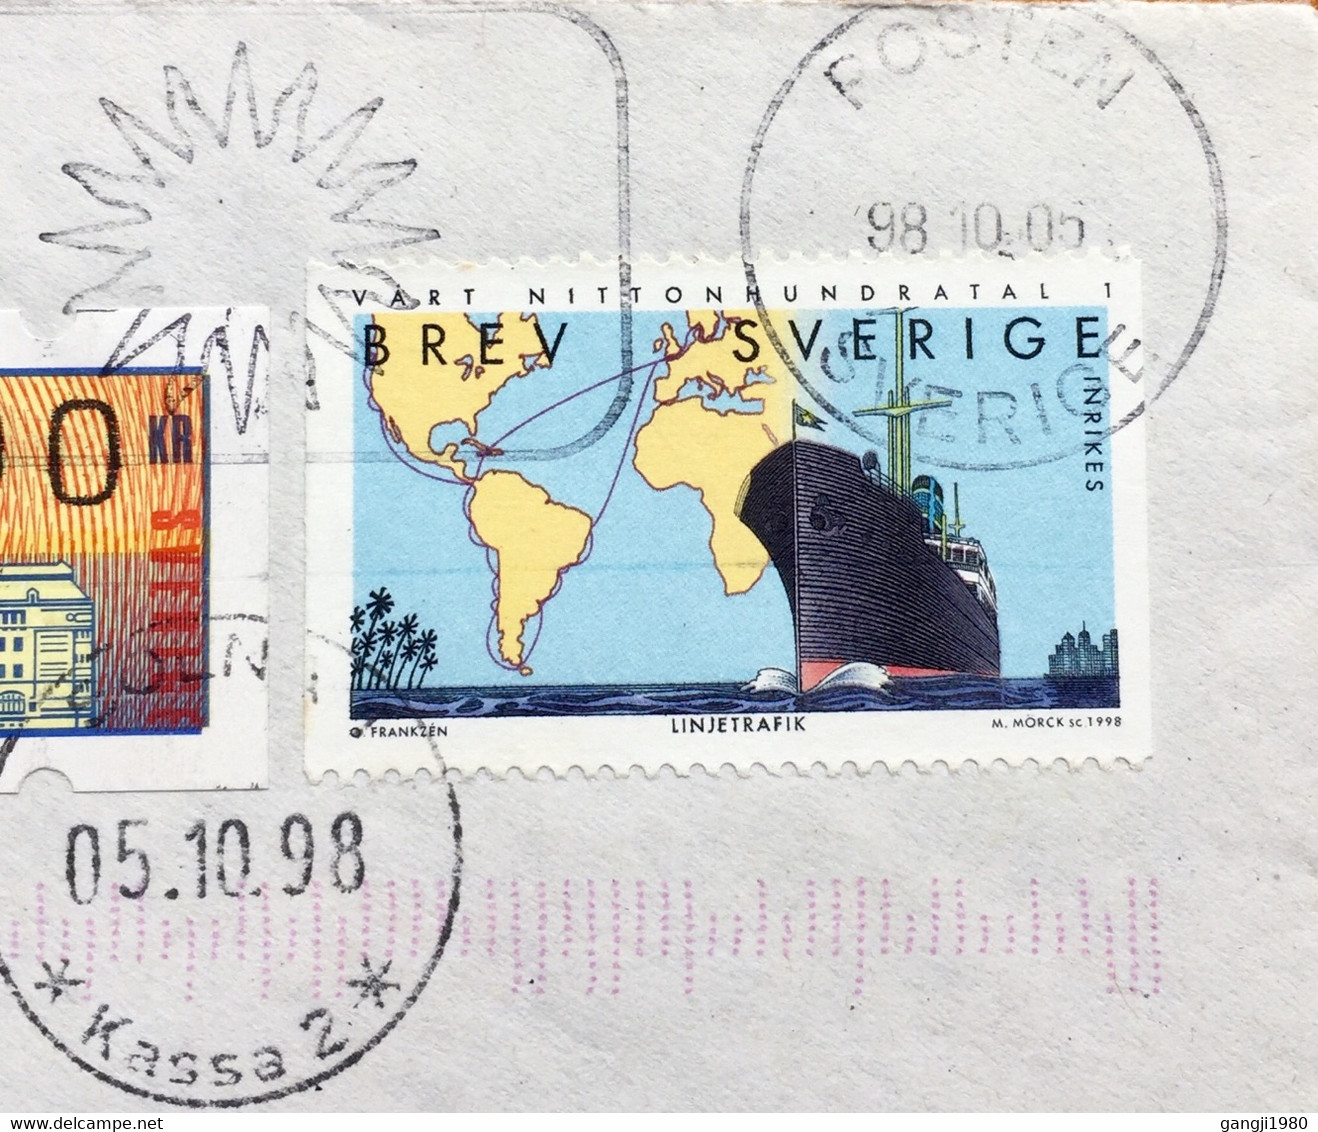 SWEDEN 1998, AIRMAIL COVER TO UK ATM STAMP ,SELF ADHESIVE STAMPS ,SHIP ,GLOBE,POST HORN ,BUILDING ,PICTURAL CANCELLATIO - Covers & Documents